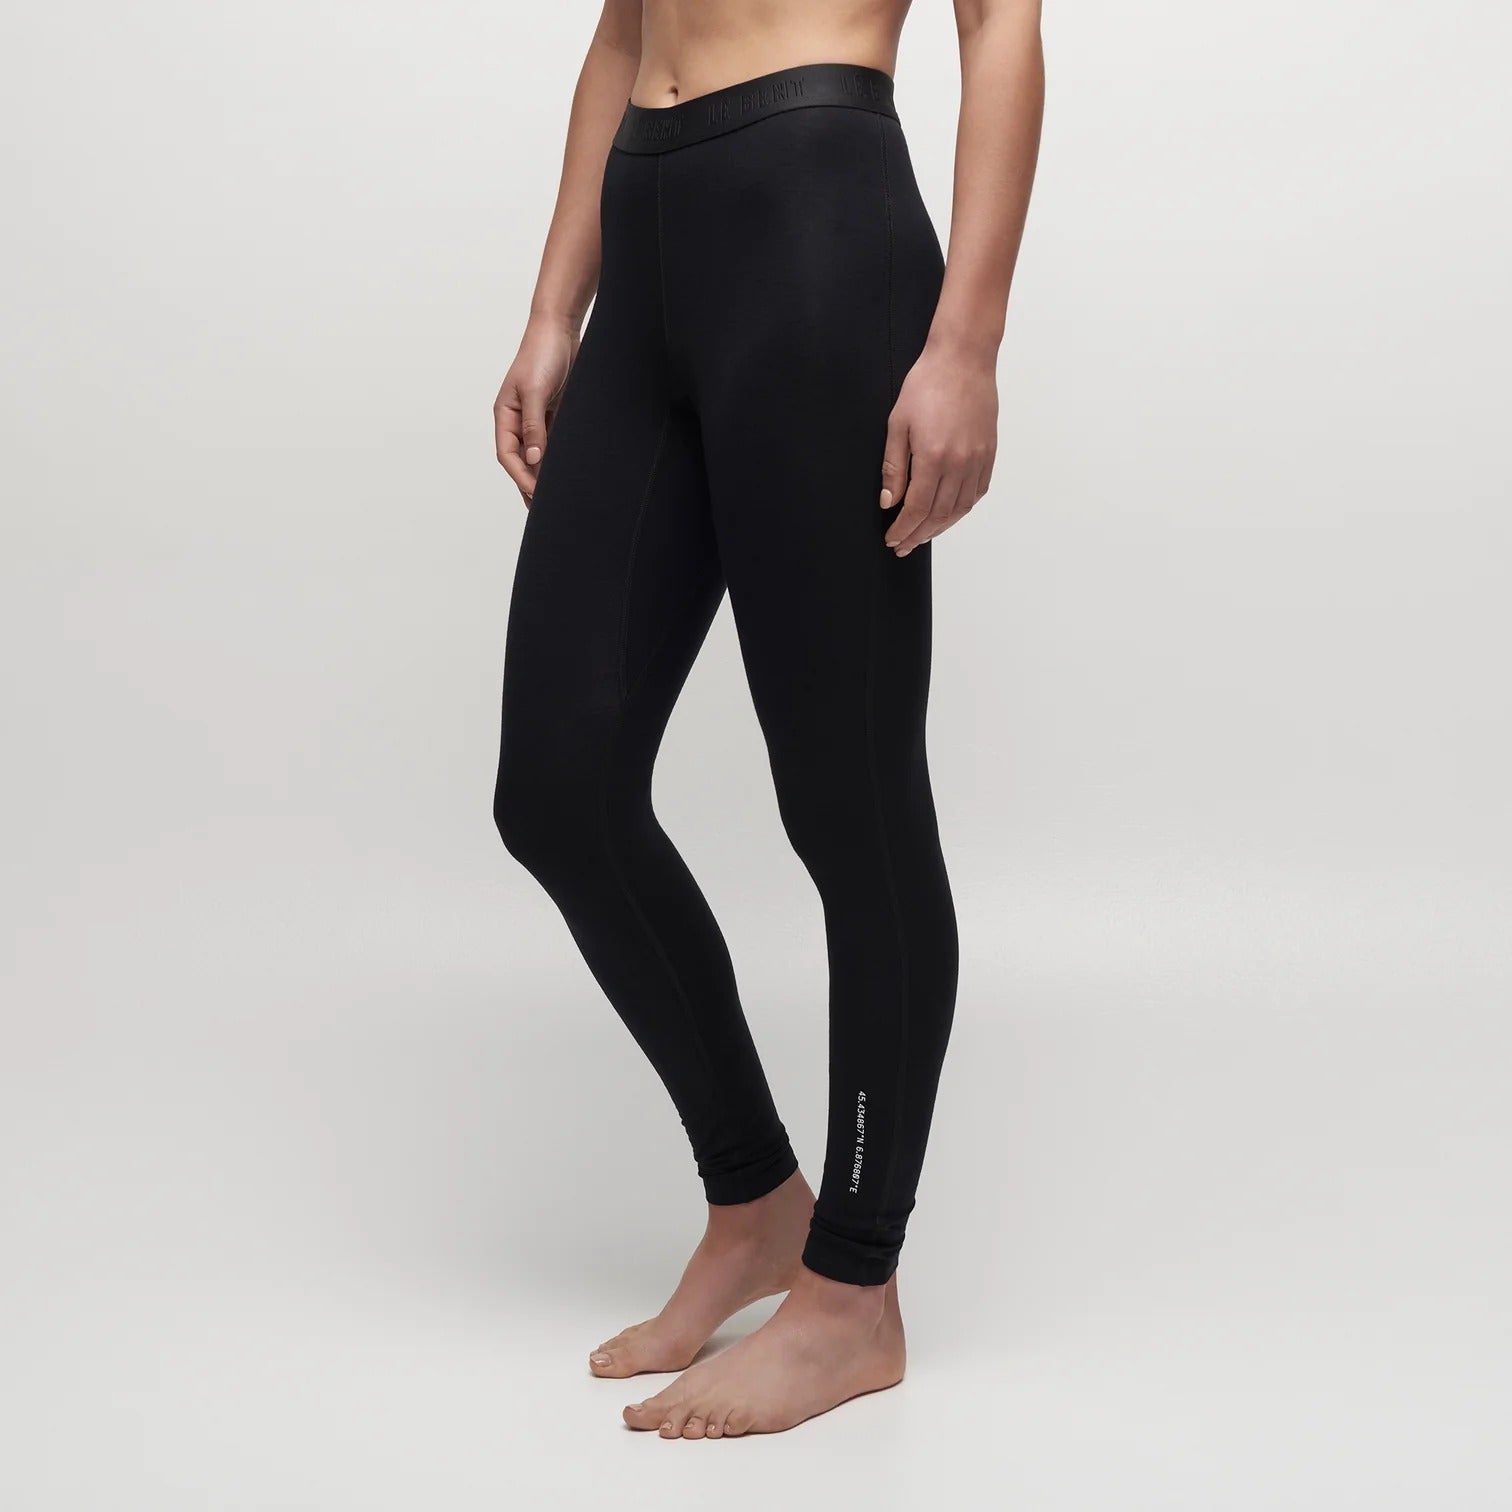 Le Bent Womens Core Lightweight Thermal Bottom Black